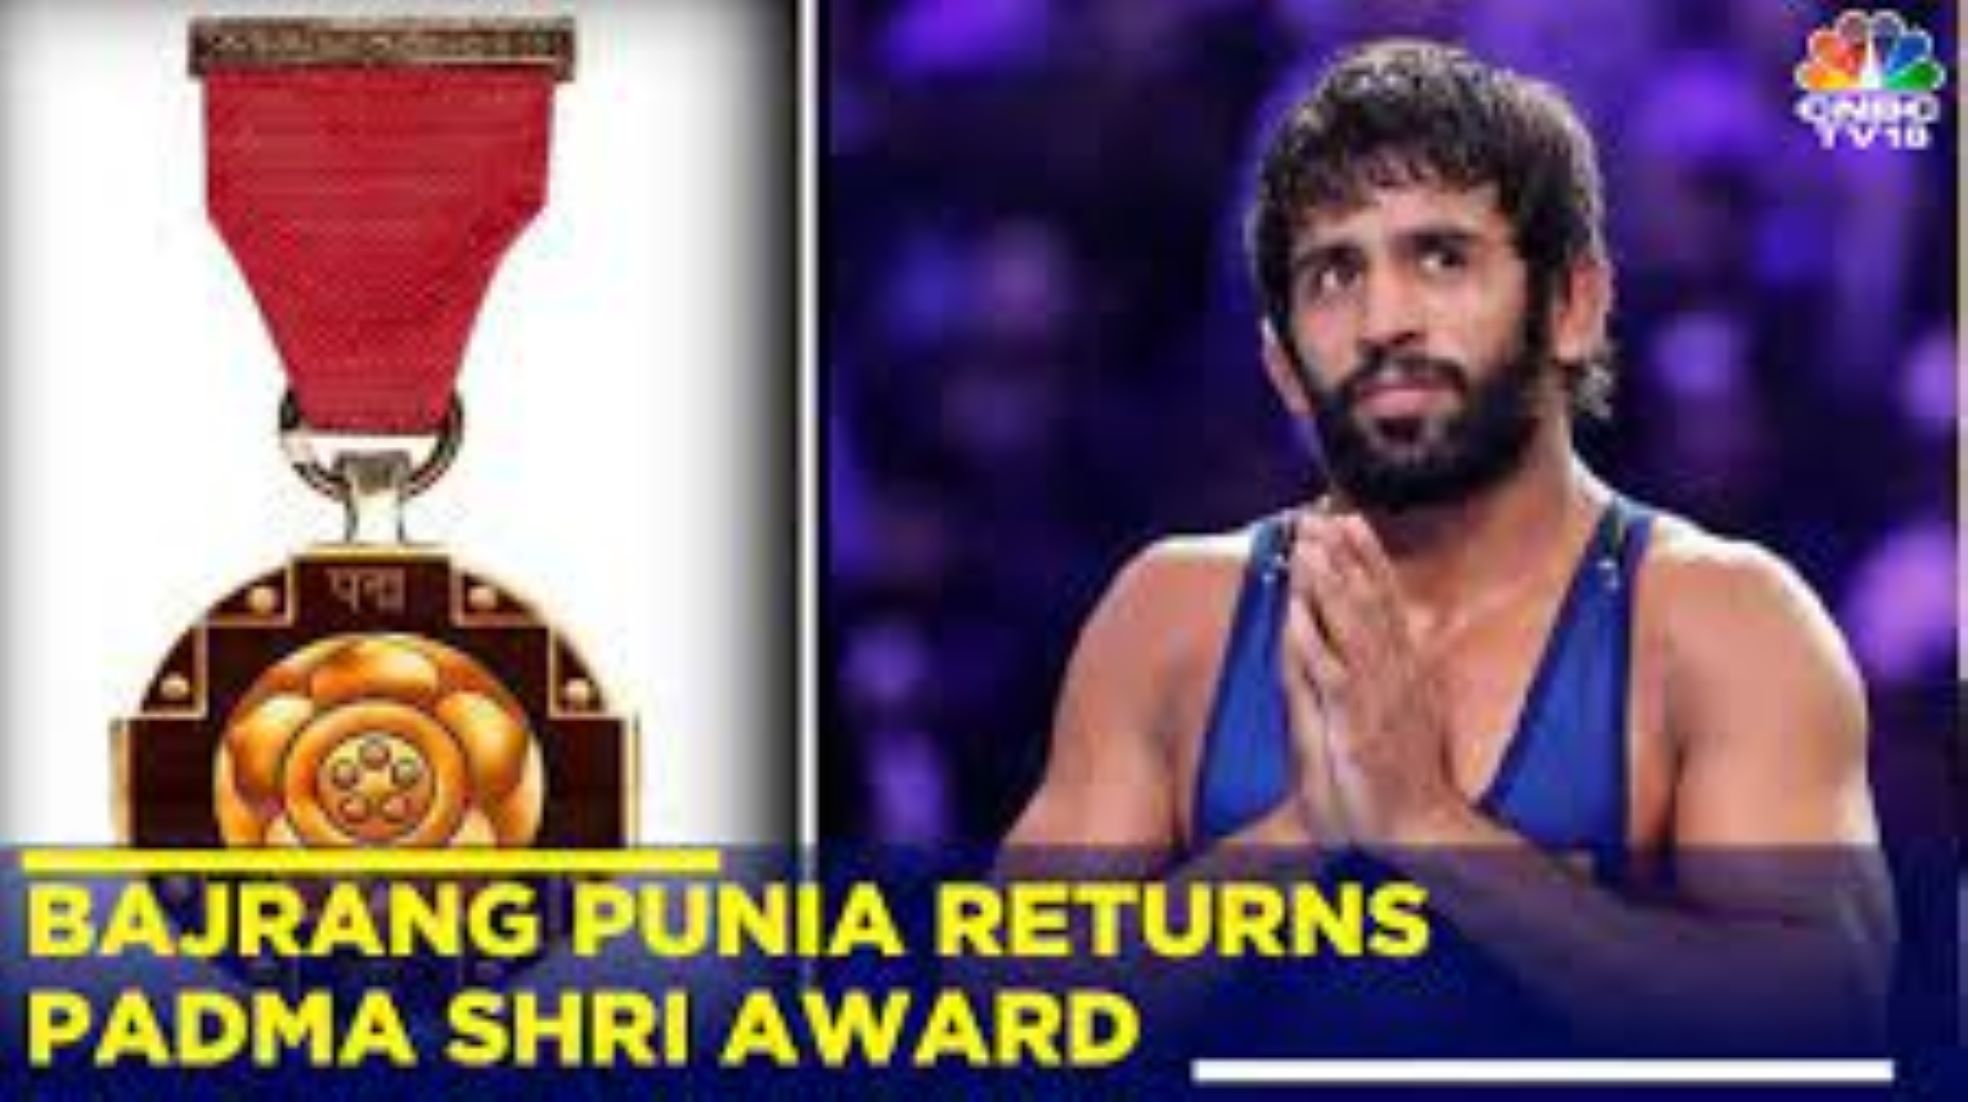 After India’s Olympic Medalist Malik Quits, Wrestler Punia Returns Award